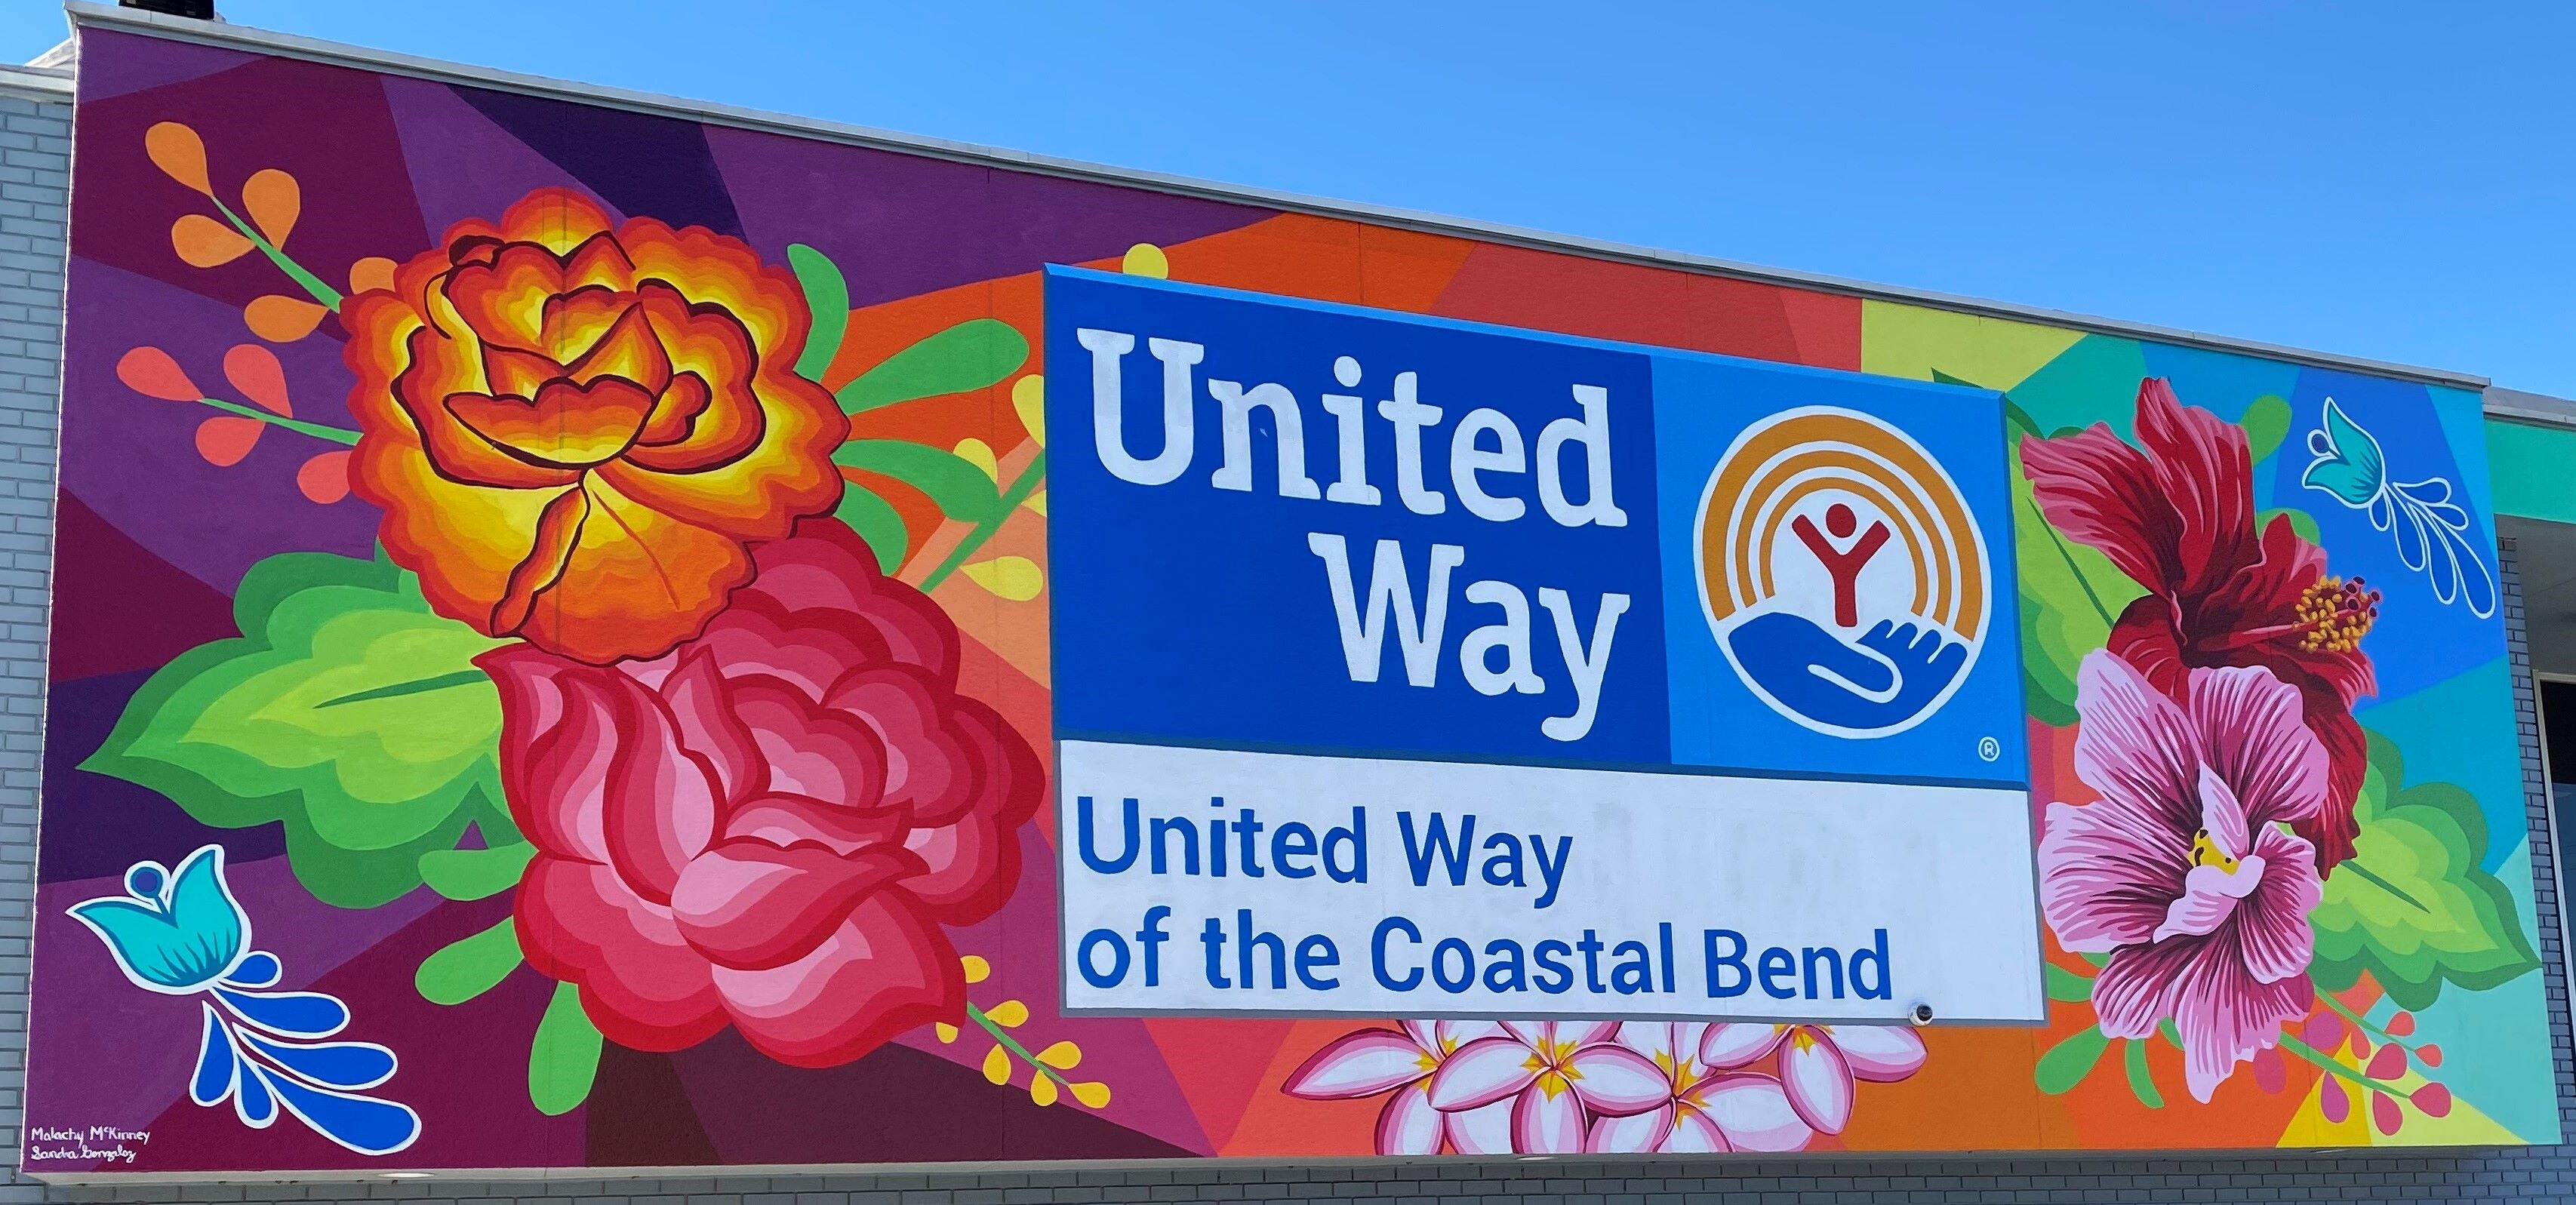 United Way of the Coastal Bend: What We Do